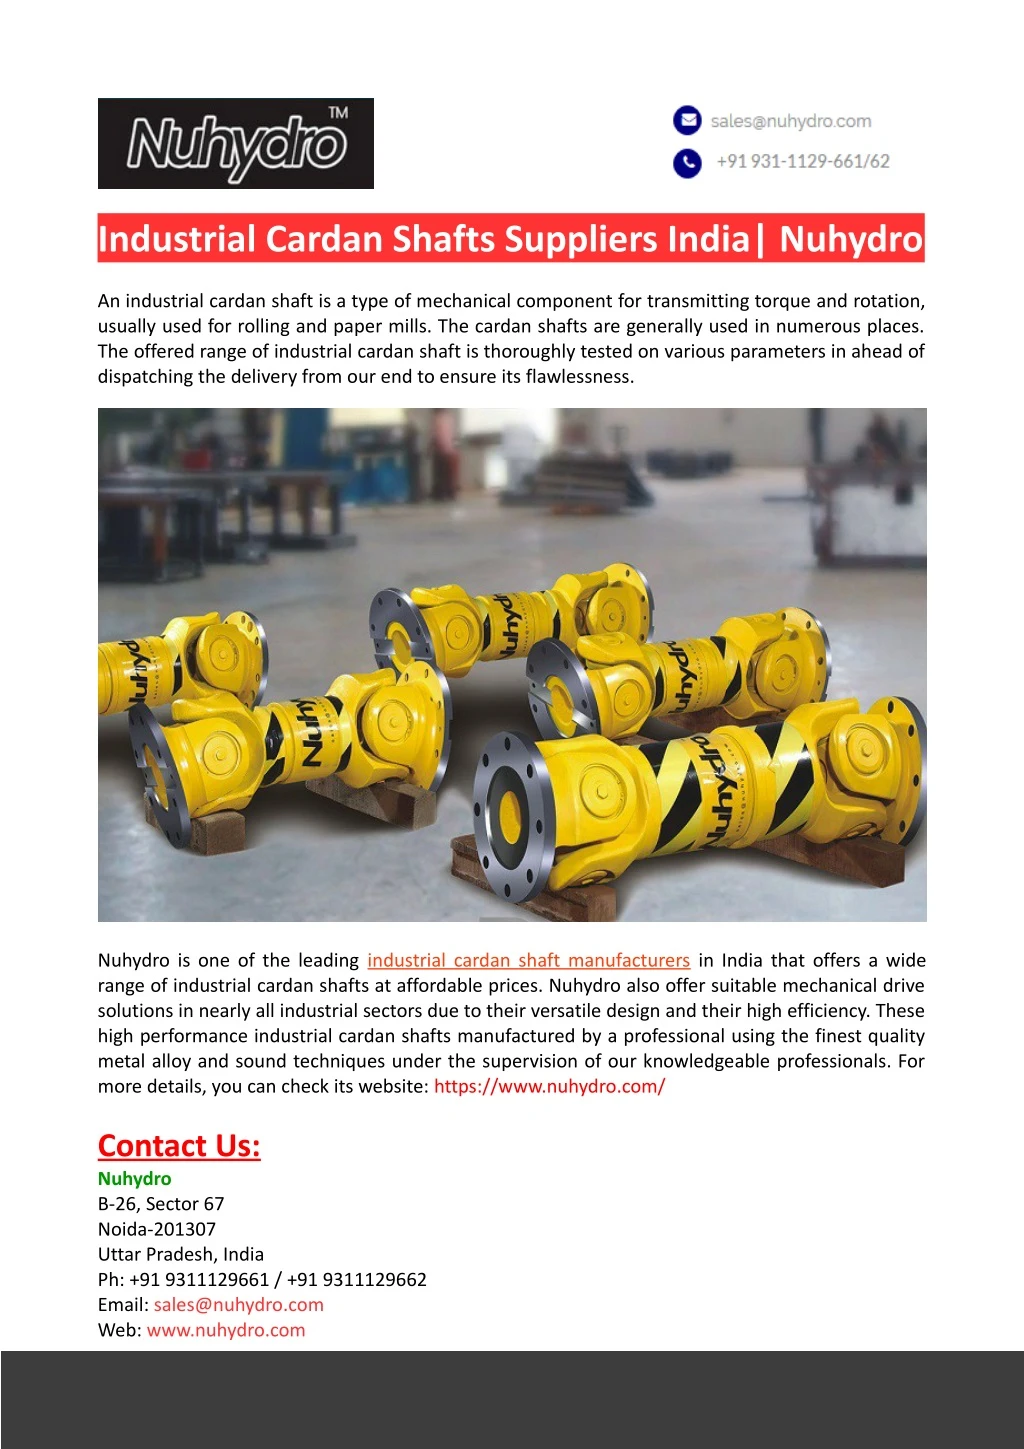 industrial cardan shafts suppliers india nuhydro